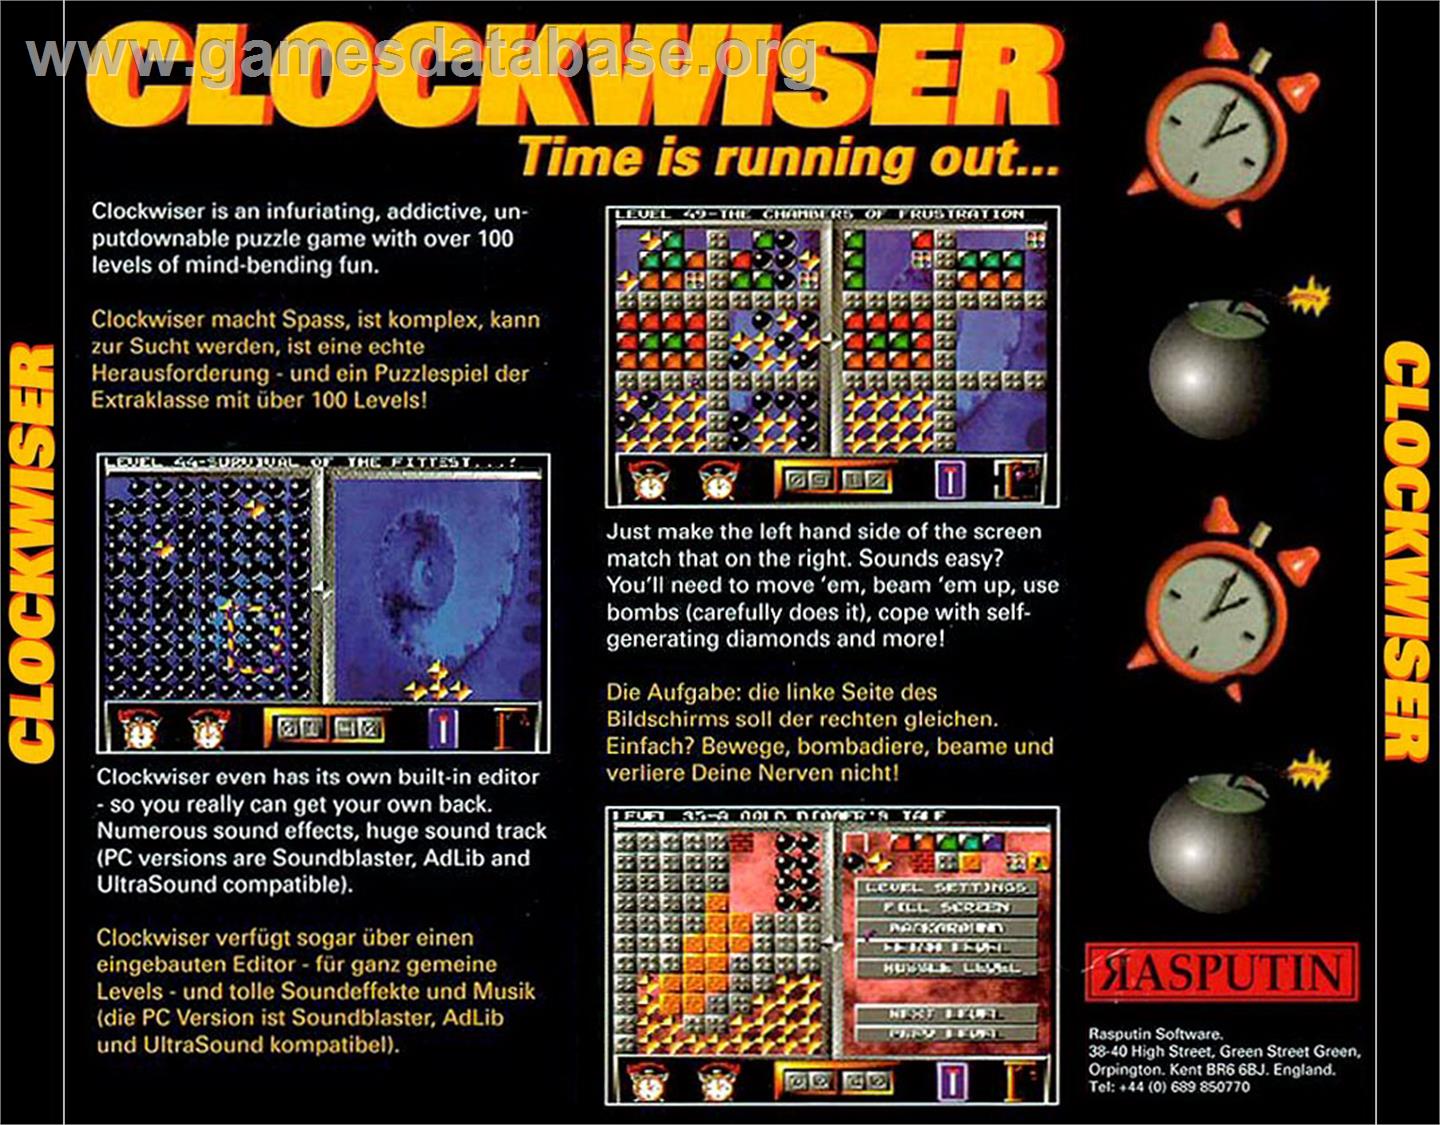 Clockwiser: Time is Running Out... - Commodore Amiga CD32 - Artwork - Box Back